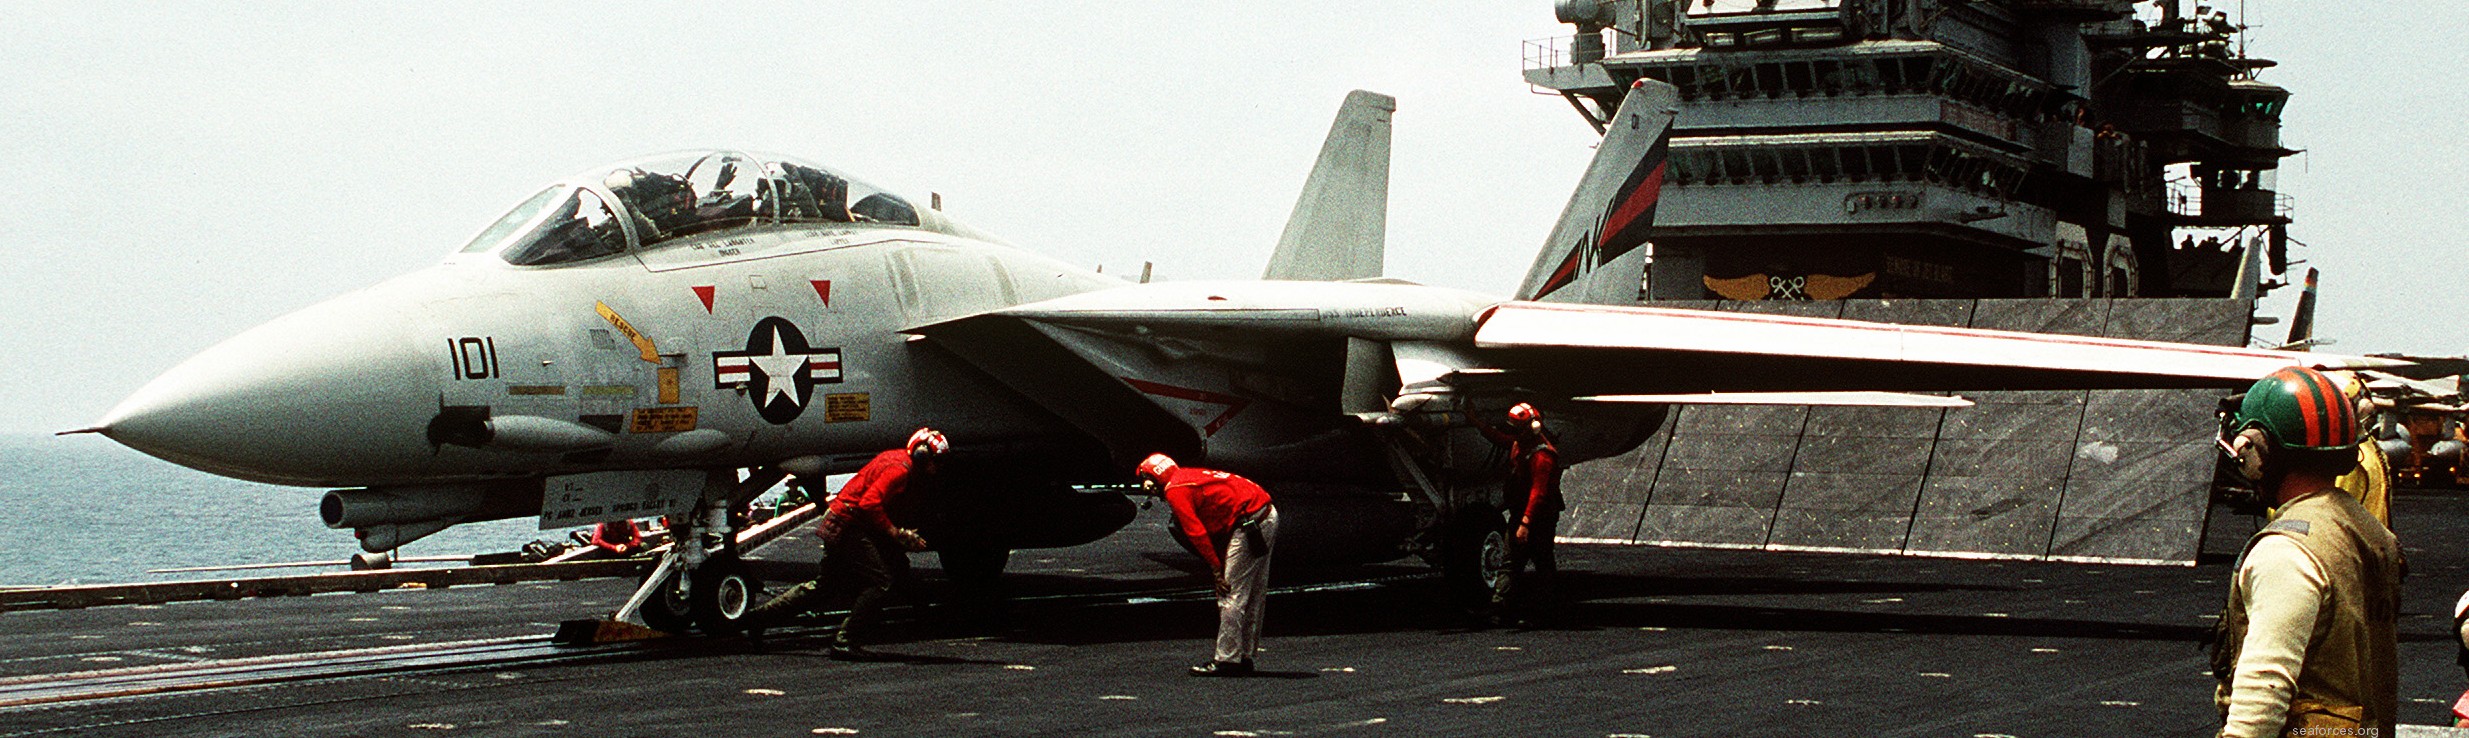 vf-154 black knights fighter squadron us navy f-14a tomcat carrier air wing cvw-14 62 uss independence cv-62